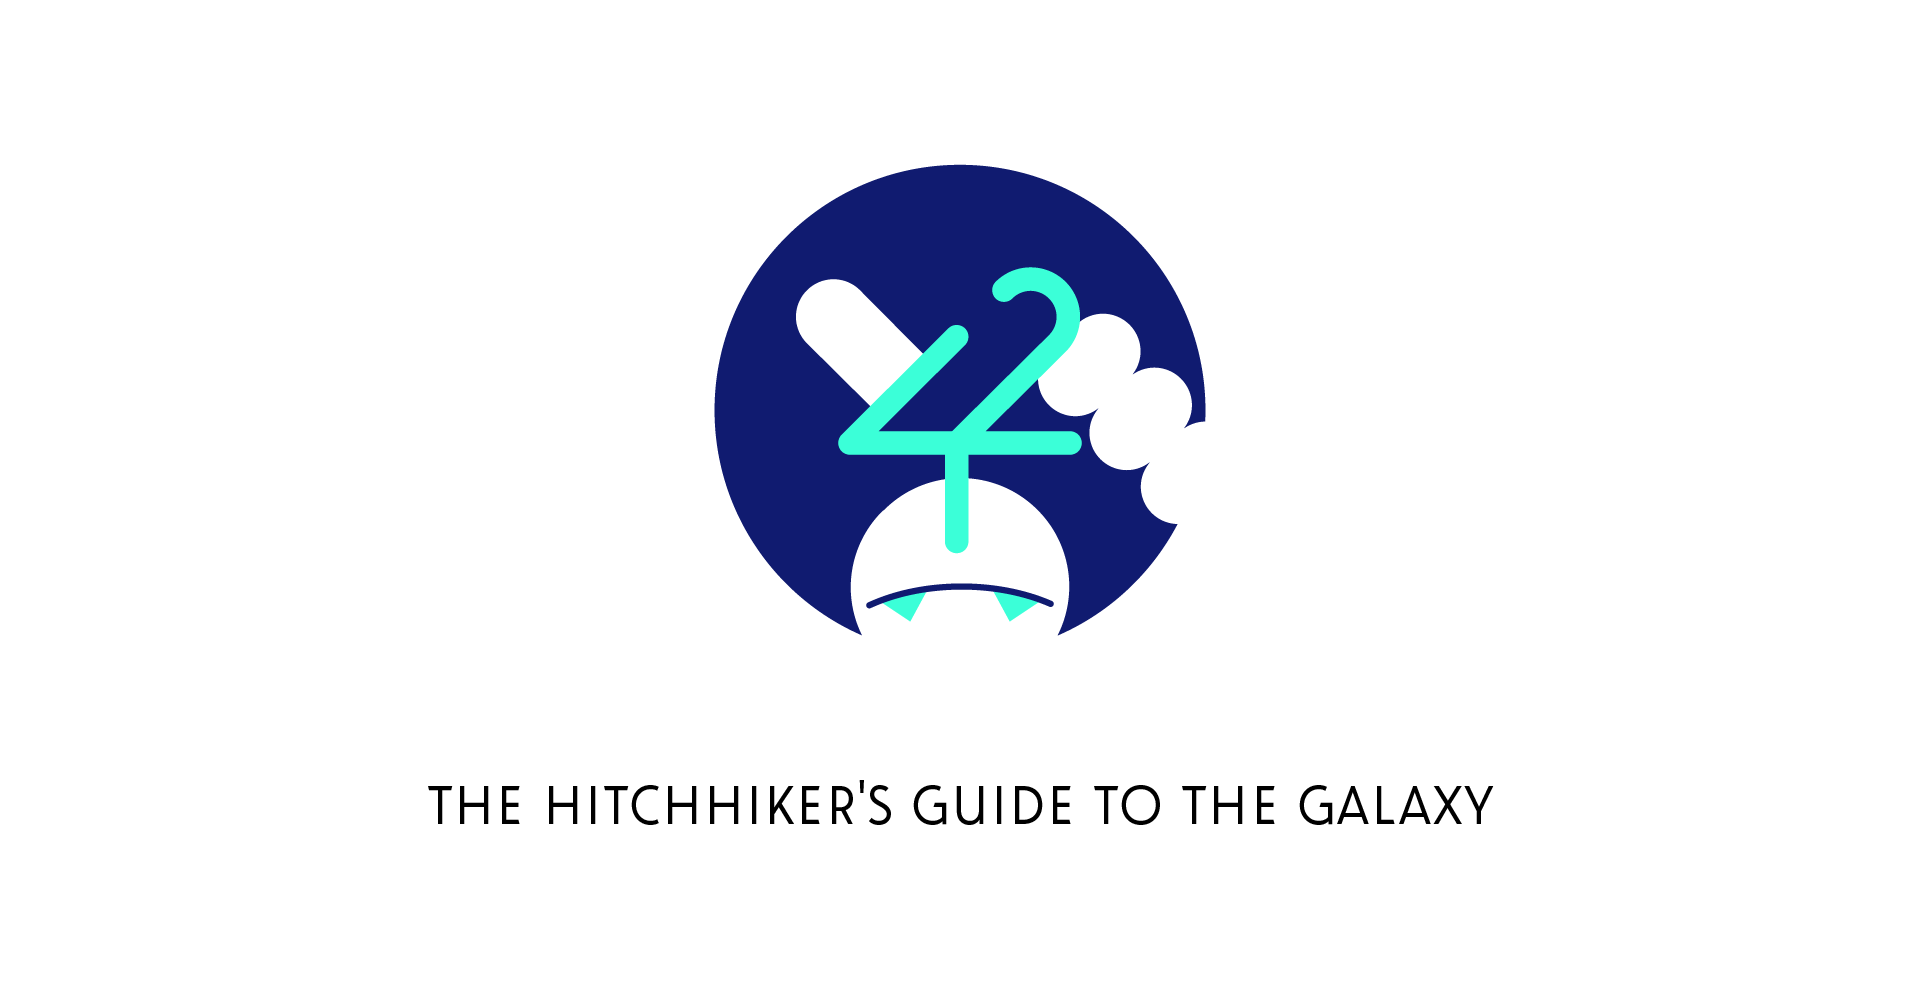 Logo for The Hitchhiker's Guide to the Galaxy, featuring the number 42 stylized to look like a hand with the thumb out, and Marvin's head below.